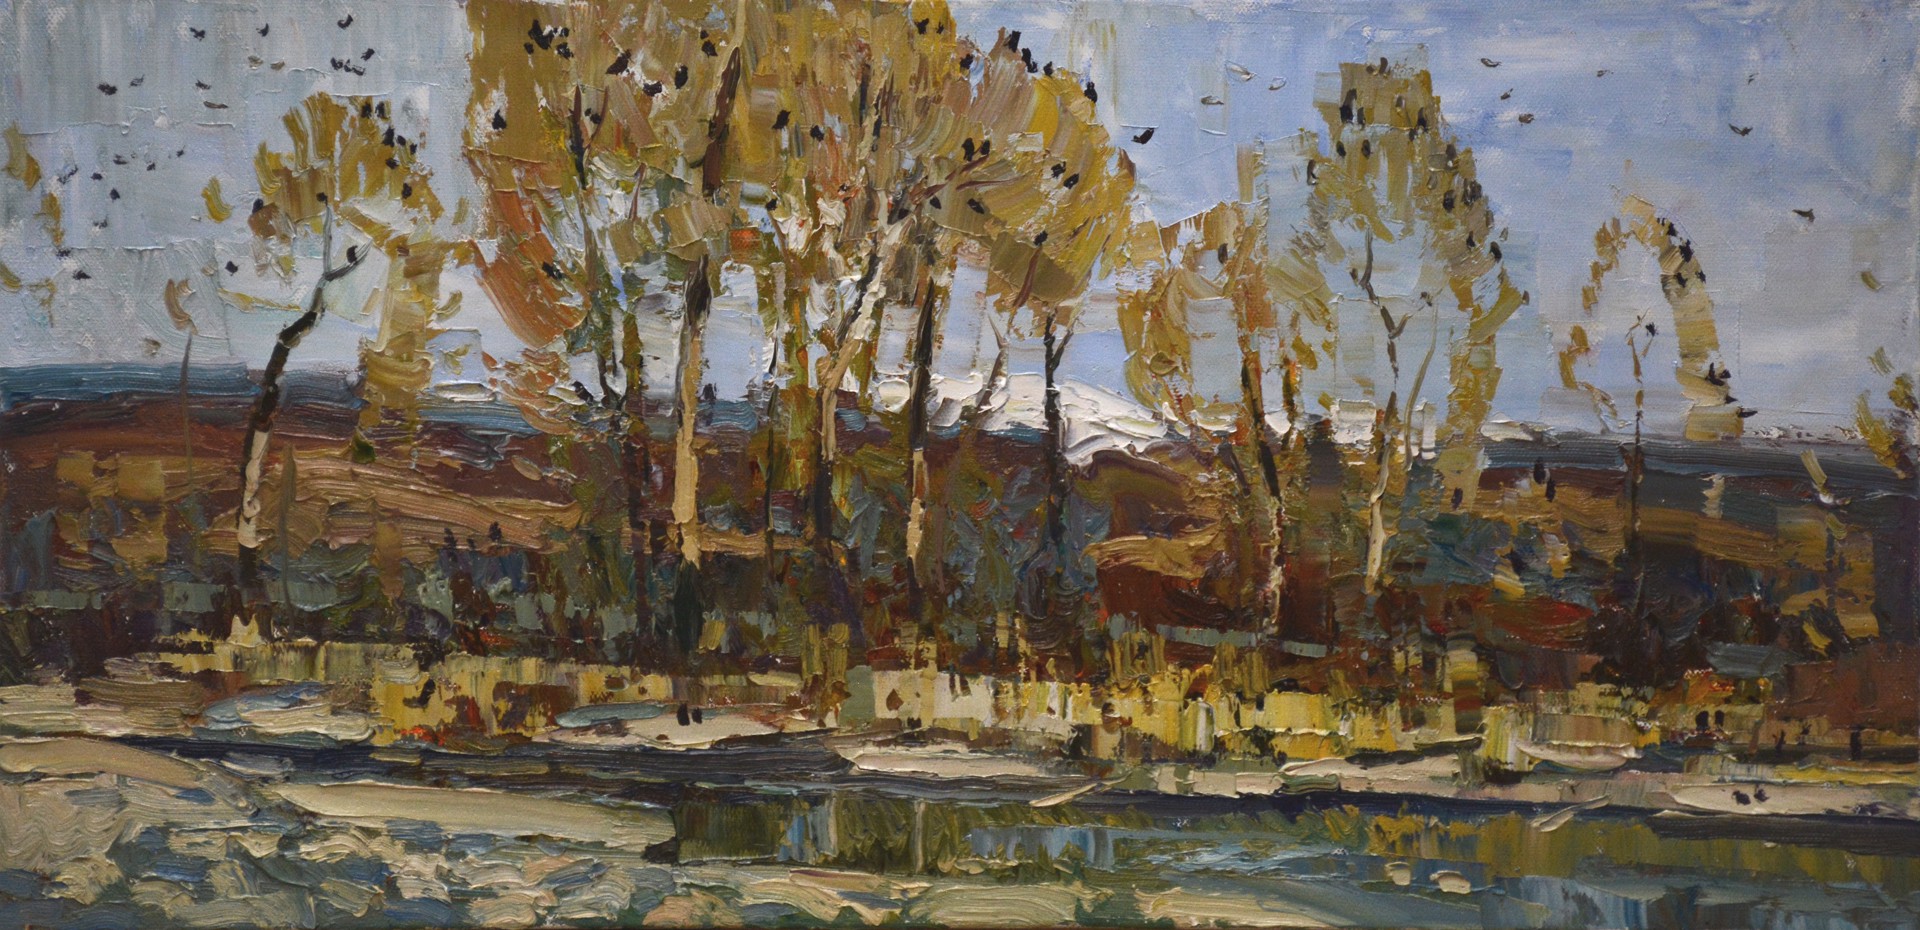 Original Contemporary Oil Painting Of Aspens By The Water With Birds Flying By Silas Thompson Available At Gallery Wild